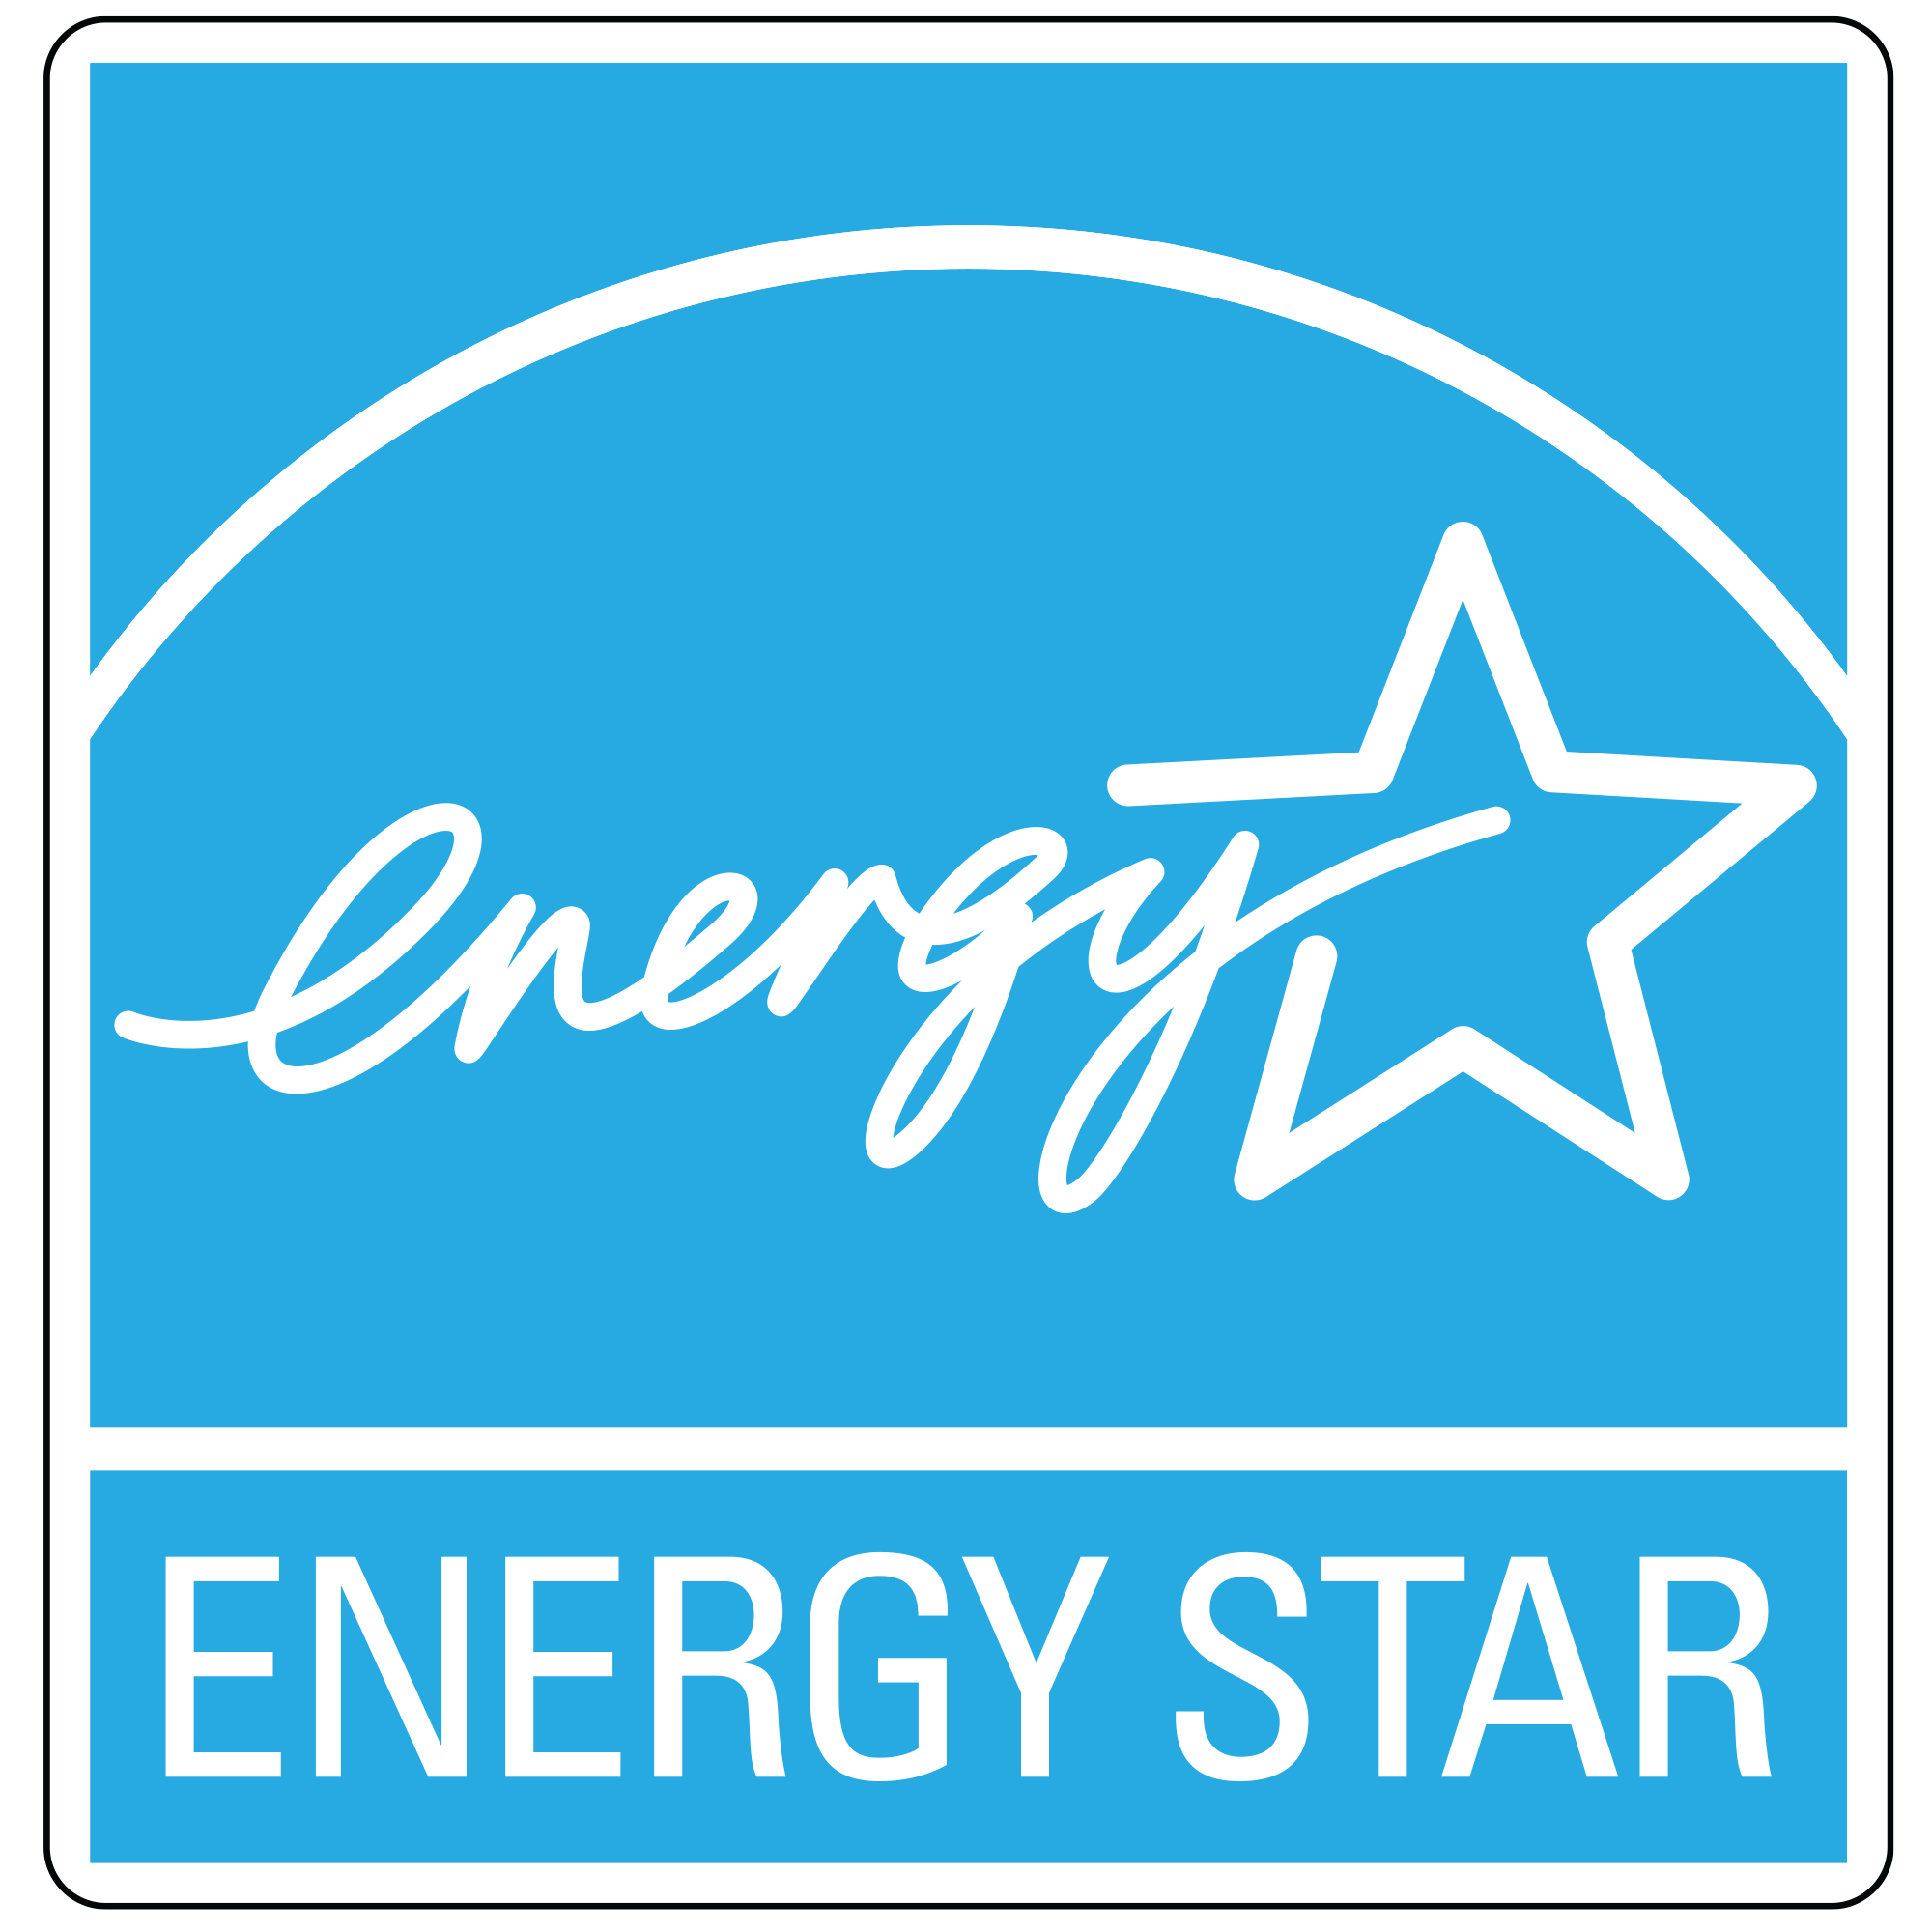 Energy Star Rated (Standard)